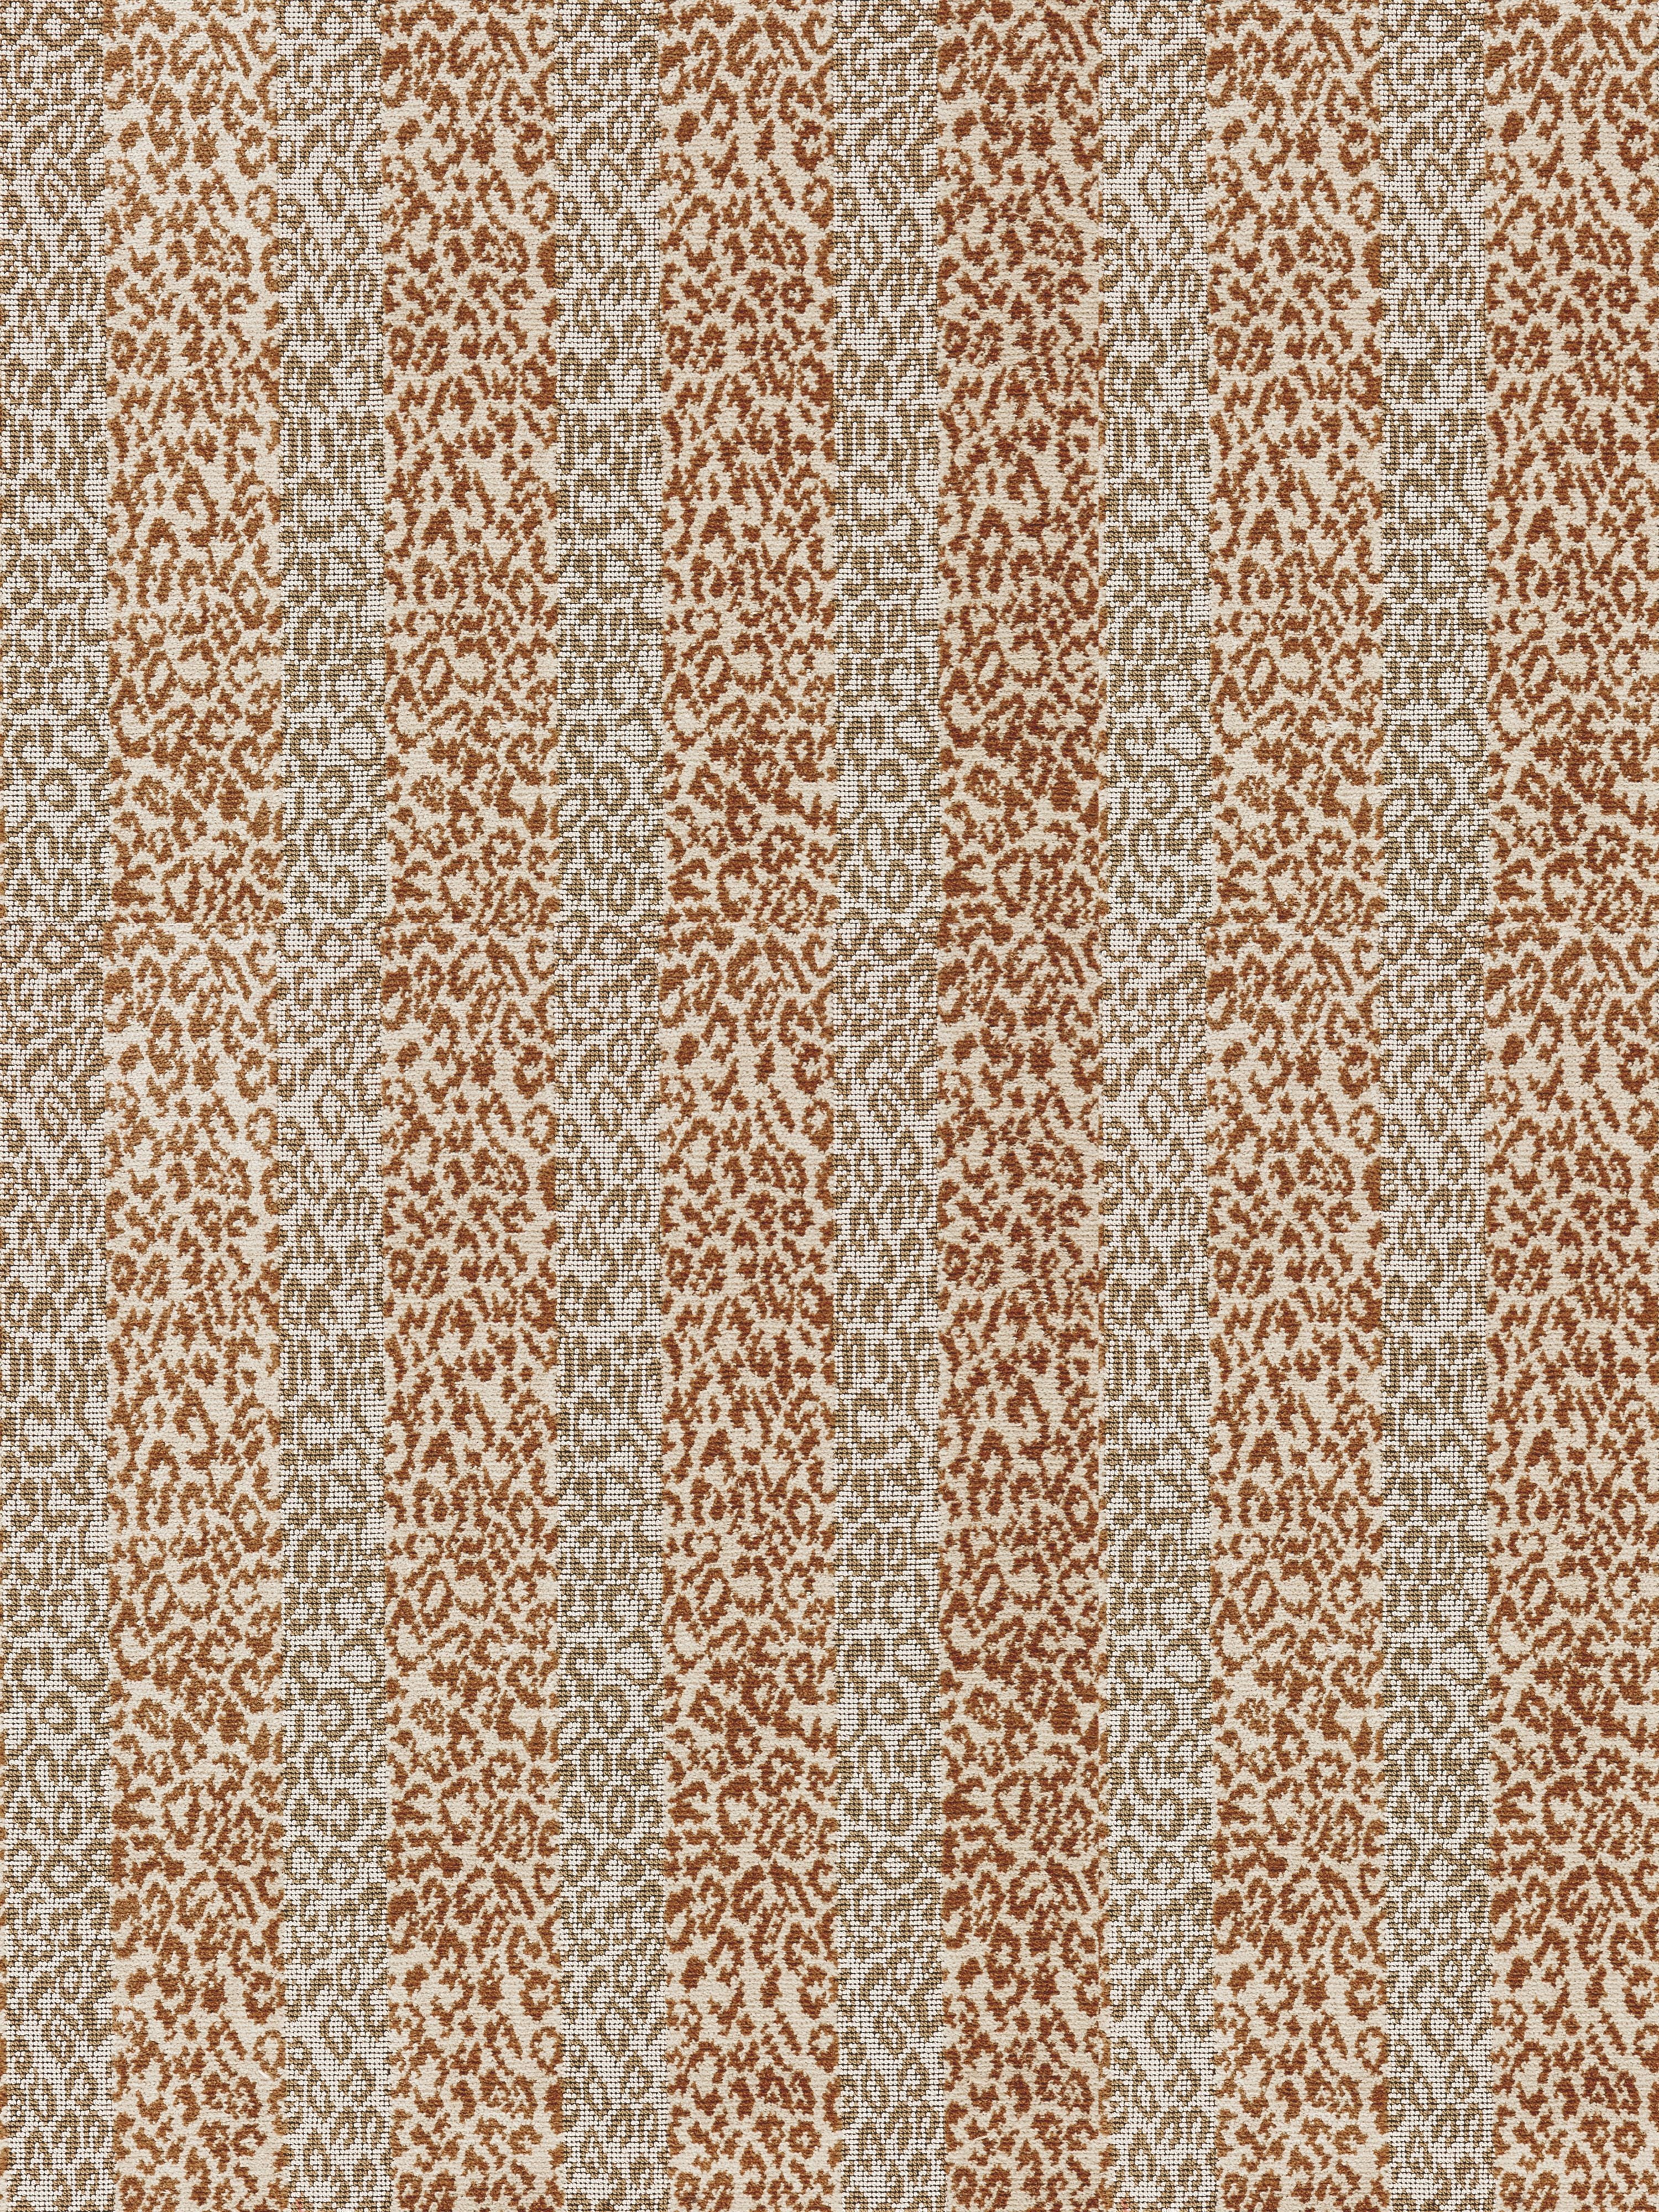 Corbet fabric in oatmeal color - pattern number SC 000126423 - by Scalamandre in the Scalamandre Fabrics Book 1 collection